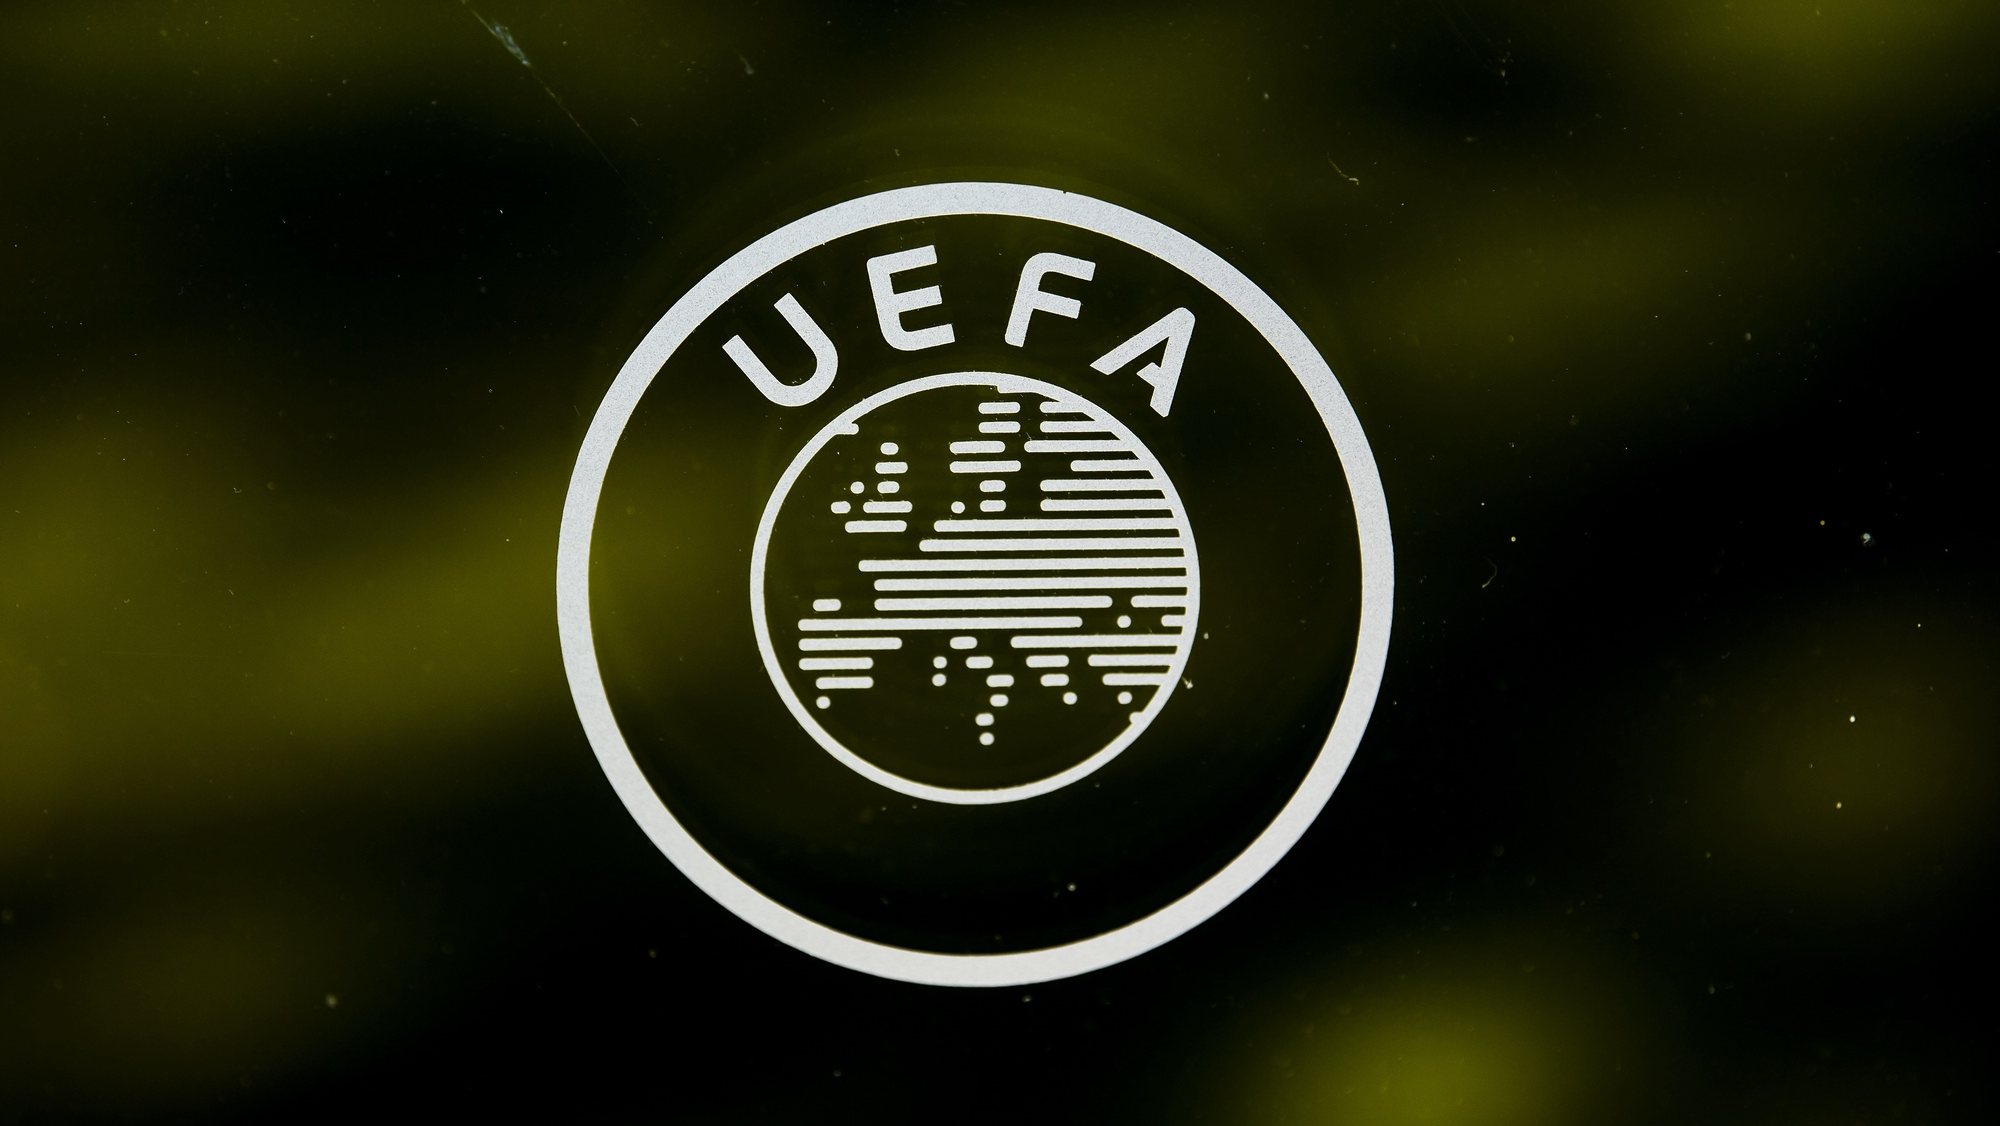 epa09792223 (FILE) - A UEFA logo is pictured through a window prior to the UEFA Europa League 2019/20 Round of 16 draw, at the UEFA Headquarters in Nyon, Switzerland, 28 February 2020 (re-issued on 28 February 2022). The world&#039;s football governing body FIFA together with the governing body of European football UEFA announced on 28 February 2022 to have decided together &#039;that all Russian teams, whether national representative teams or club teams, shall be suspended from participation in both FIFA and UEFA competitions until further notice&#039;.  EPA/JEAN-CHRISTOPHE BOTT *** Local Caption *** 55912791